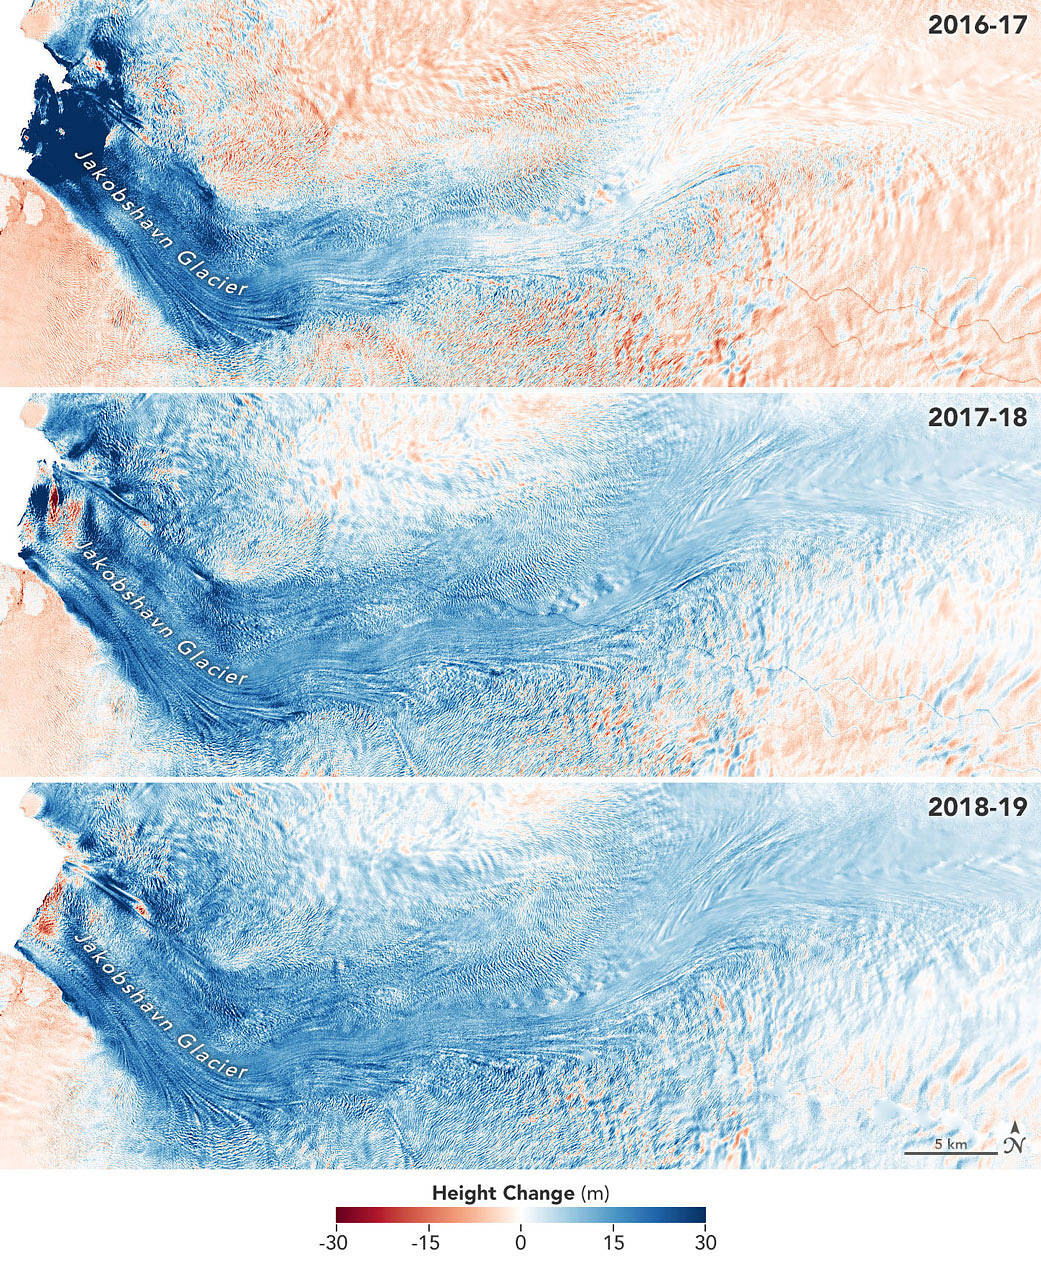 Jakobshavn Glacier Grows for Third Year in a Row